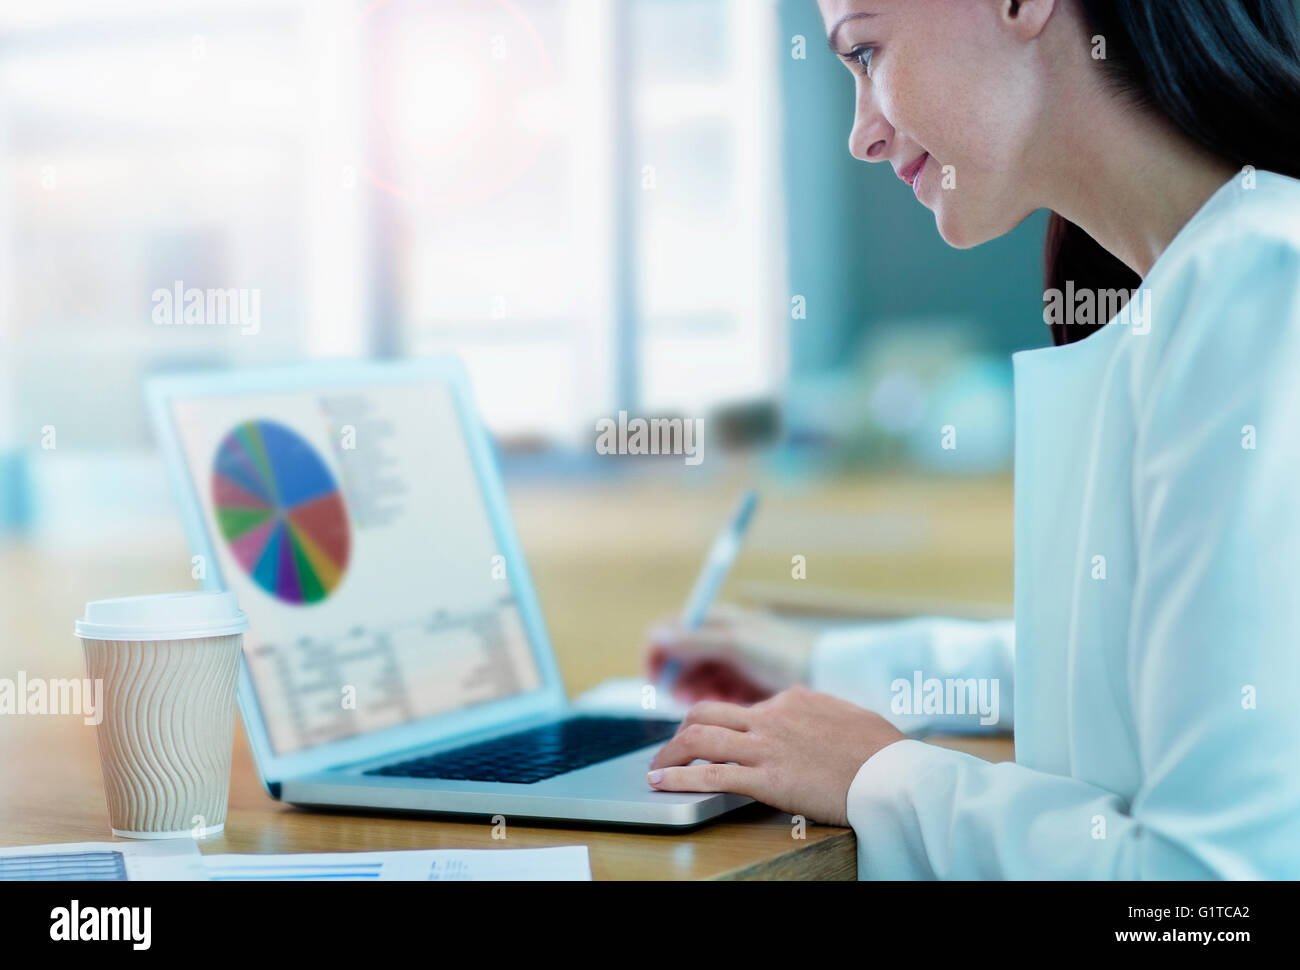 Businesswoman working at laptop Banque D'Images